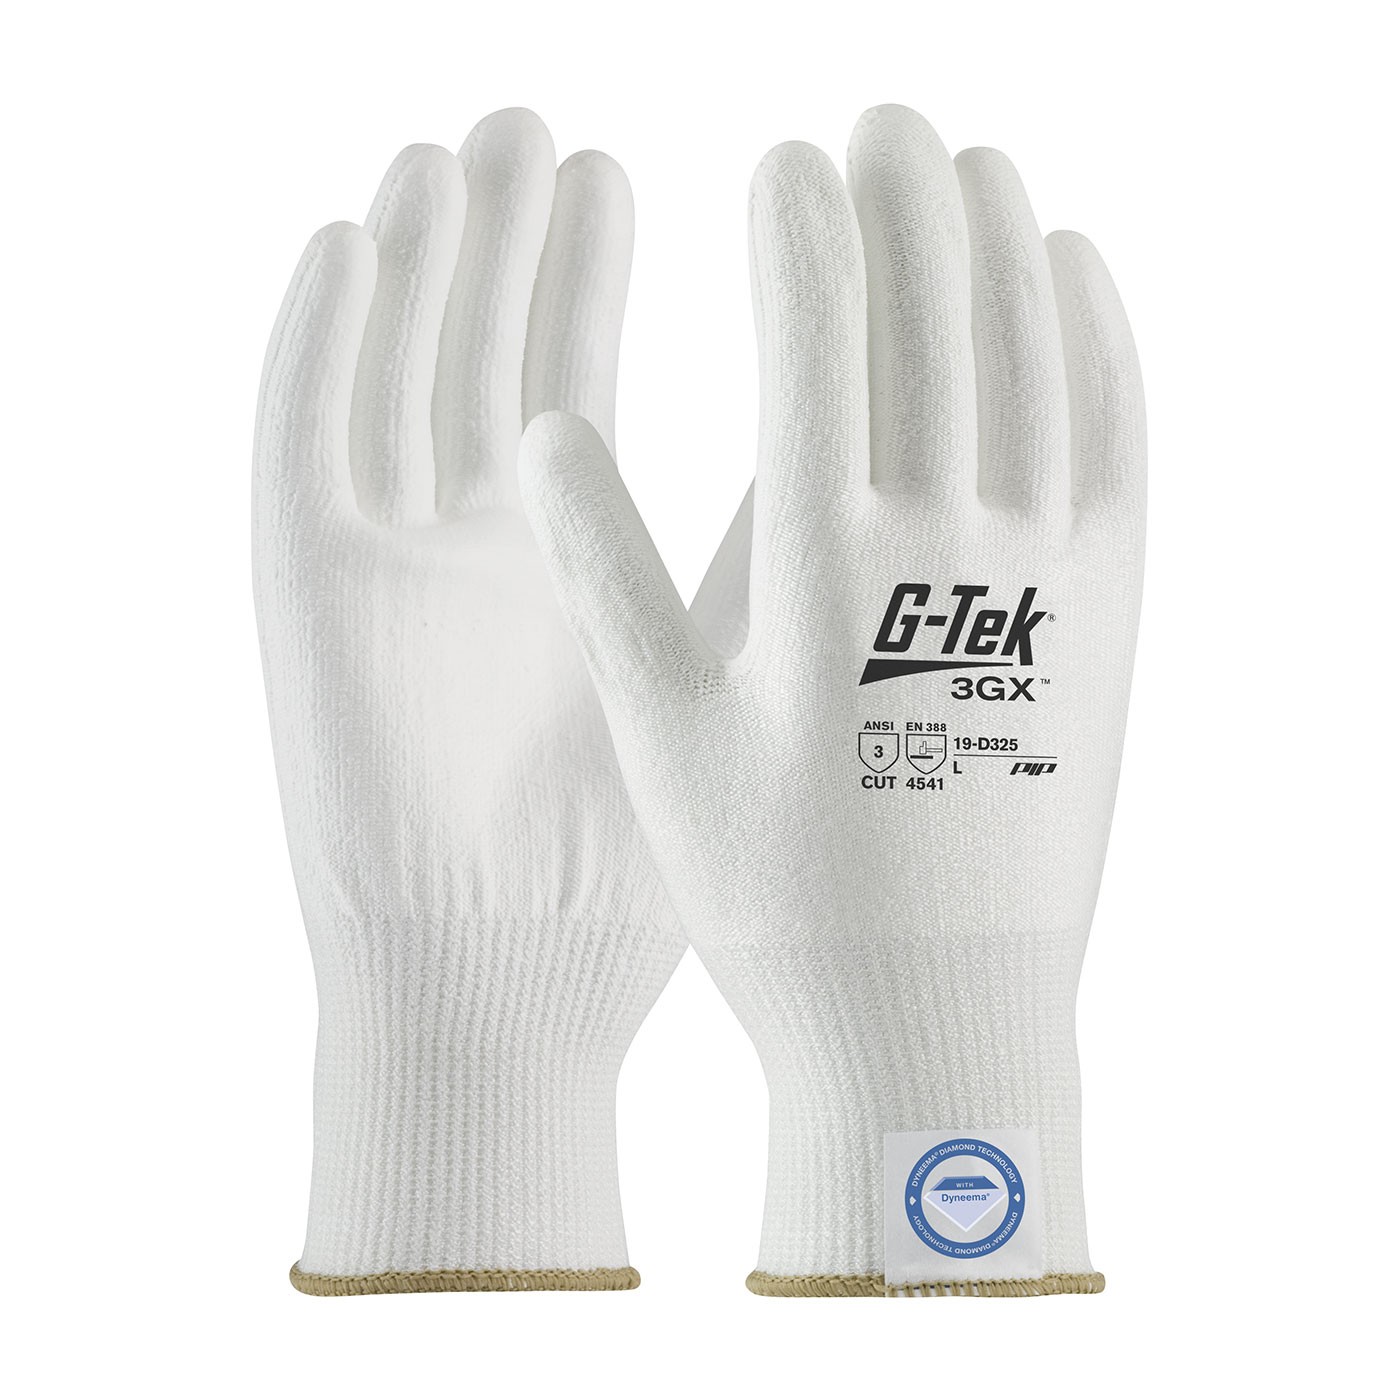 G-Tek® 3GX® Seamless Knit Dyneema® Diamond Blended Glove with Polyurethane Coated Smooth Grip on Palm & Fingers  (#19-D325)